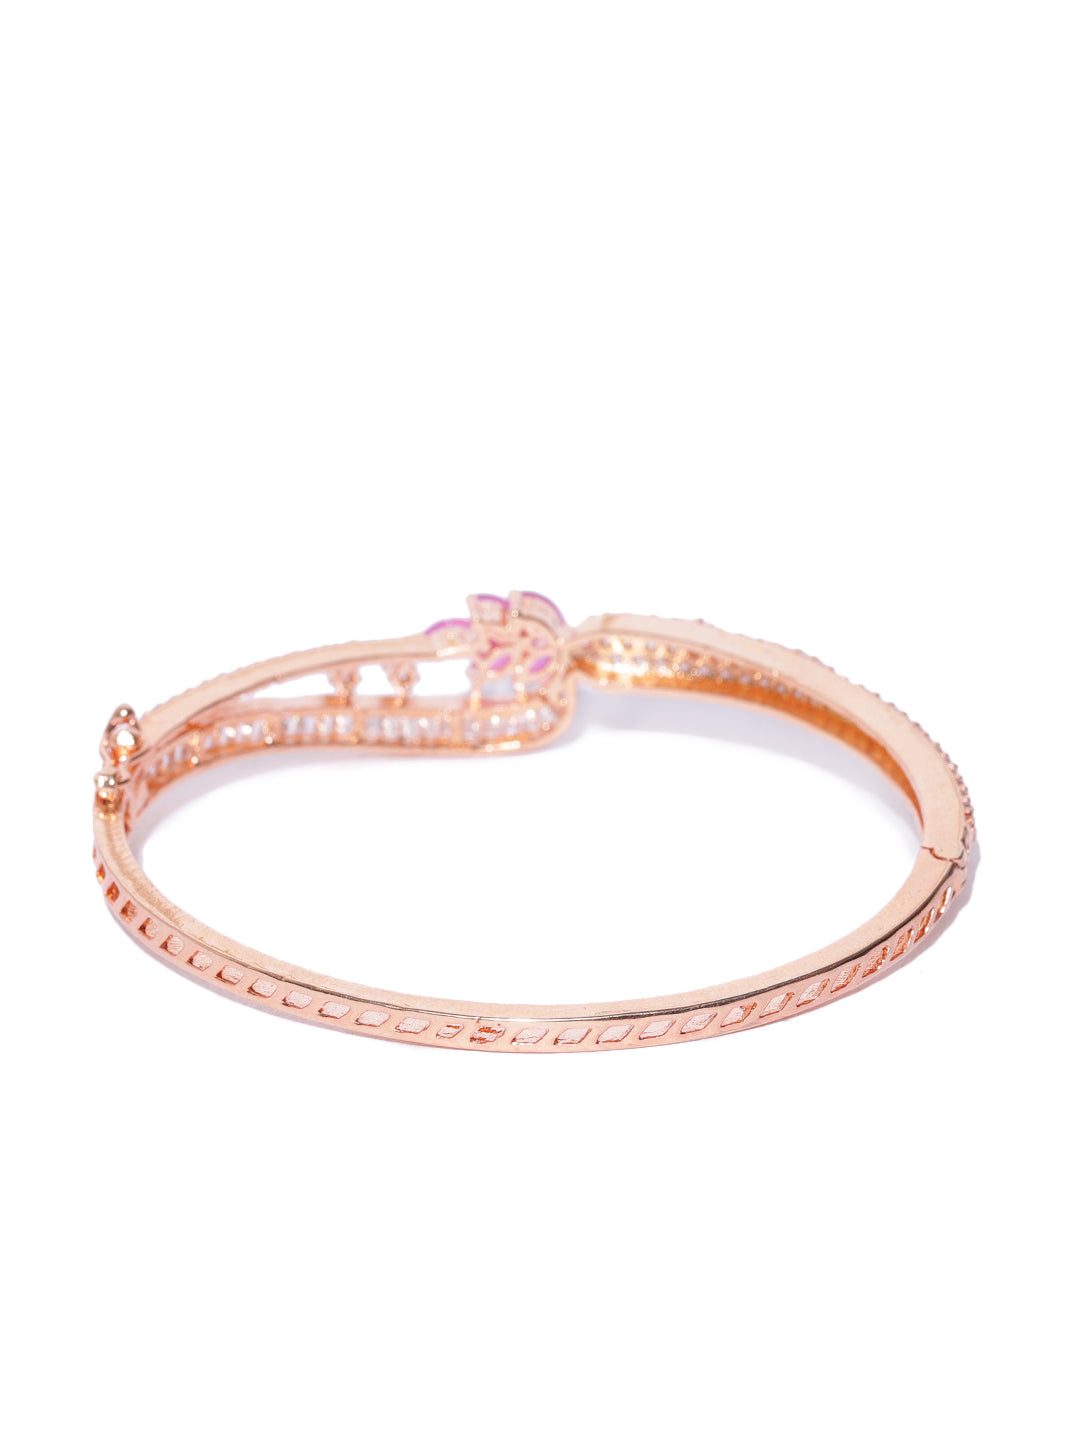 Rose Gold-Plated Ruby and American Diamond Studded Bracelet in Floral Pattern